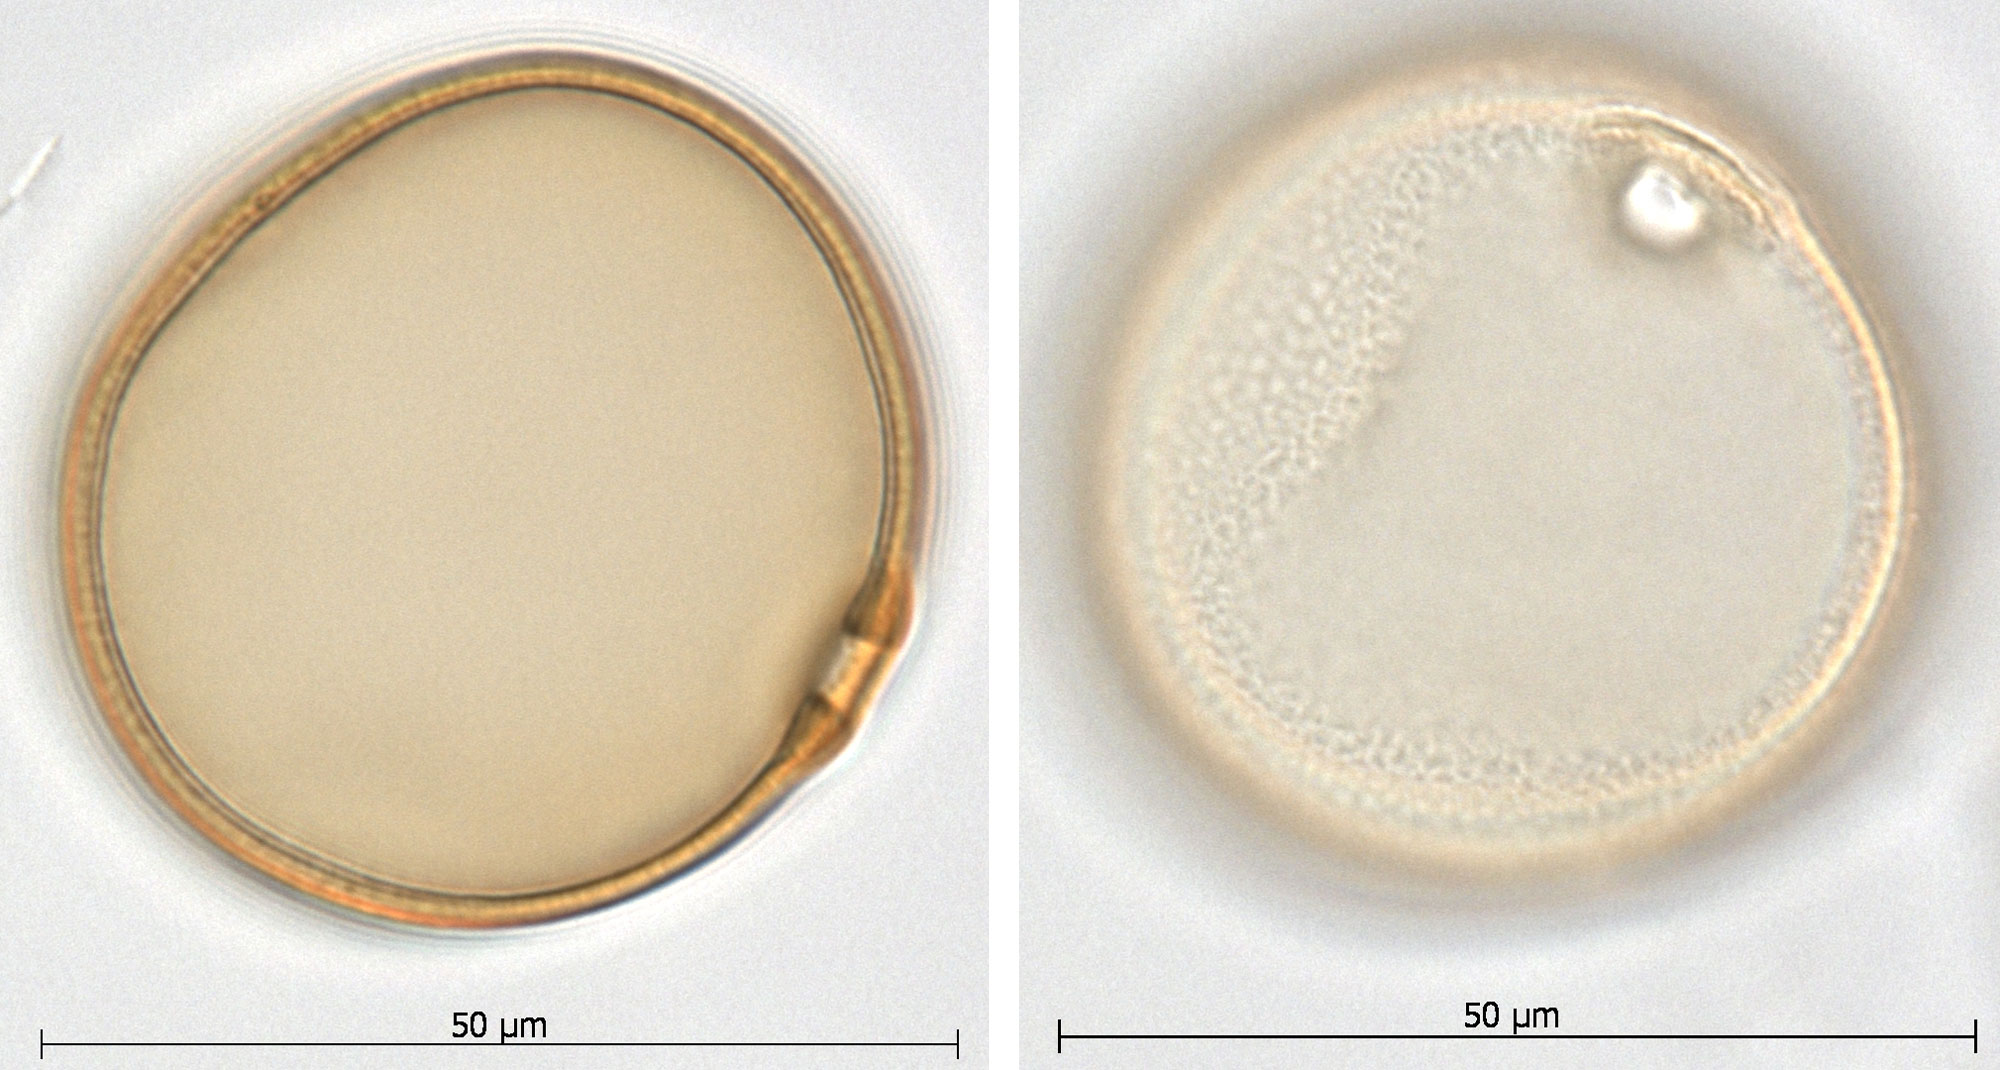 2-panel image showing photos of a tangelhead pollen grain taken under a microscope. Panel 1: Grain shown in side view with pore near the lower right. Panel 2: Grain focused to show pebbly surface and single small round pore, which is near the upper right. Both image show the grain is about 50 microns in diameter.